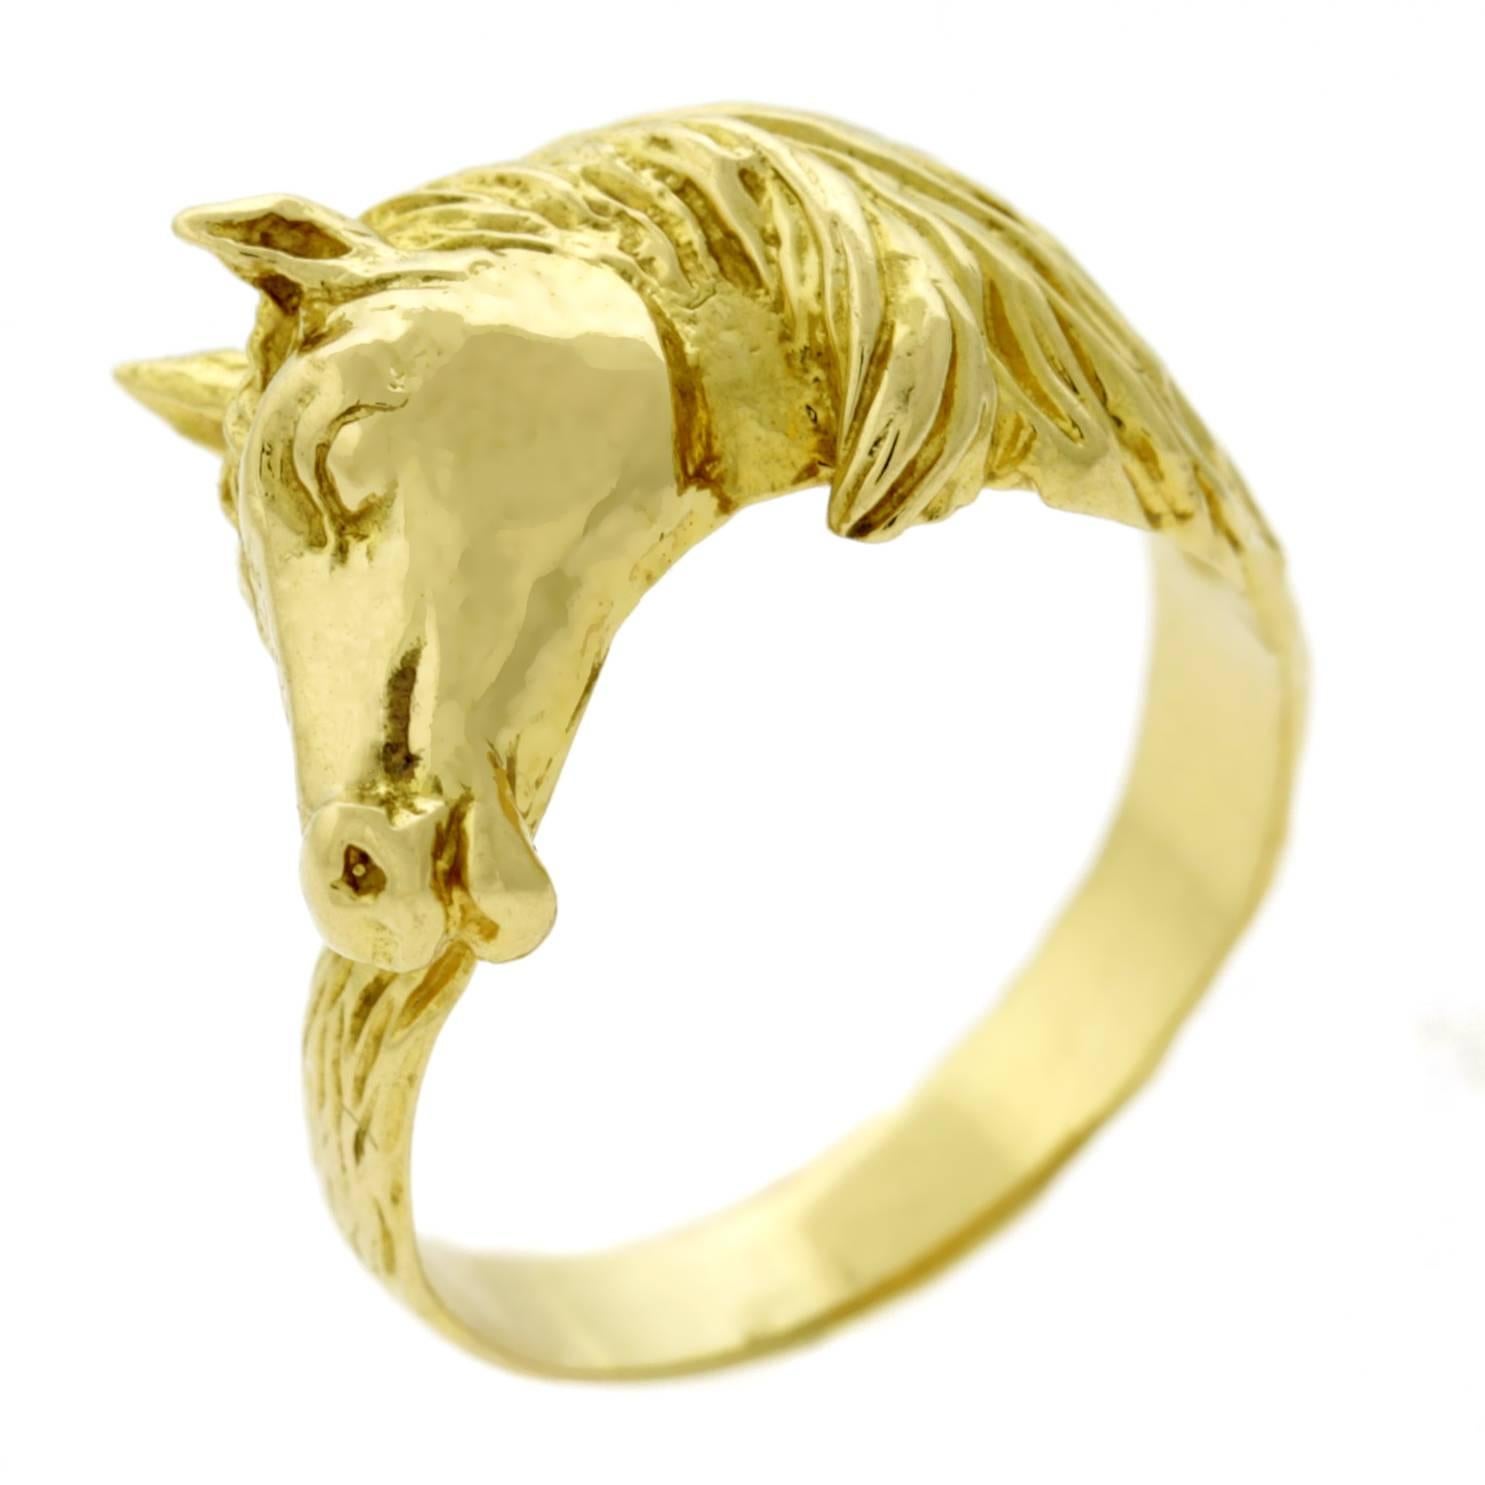 A fabulous rare Hermes Paris 18k yellow gold ring depicting an iconic horse head motif. The ring measures .55